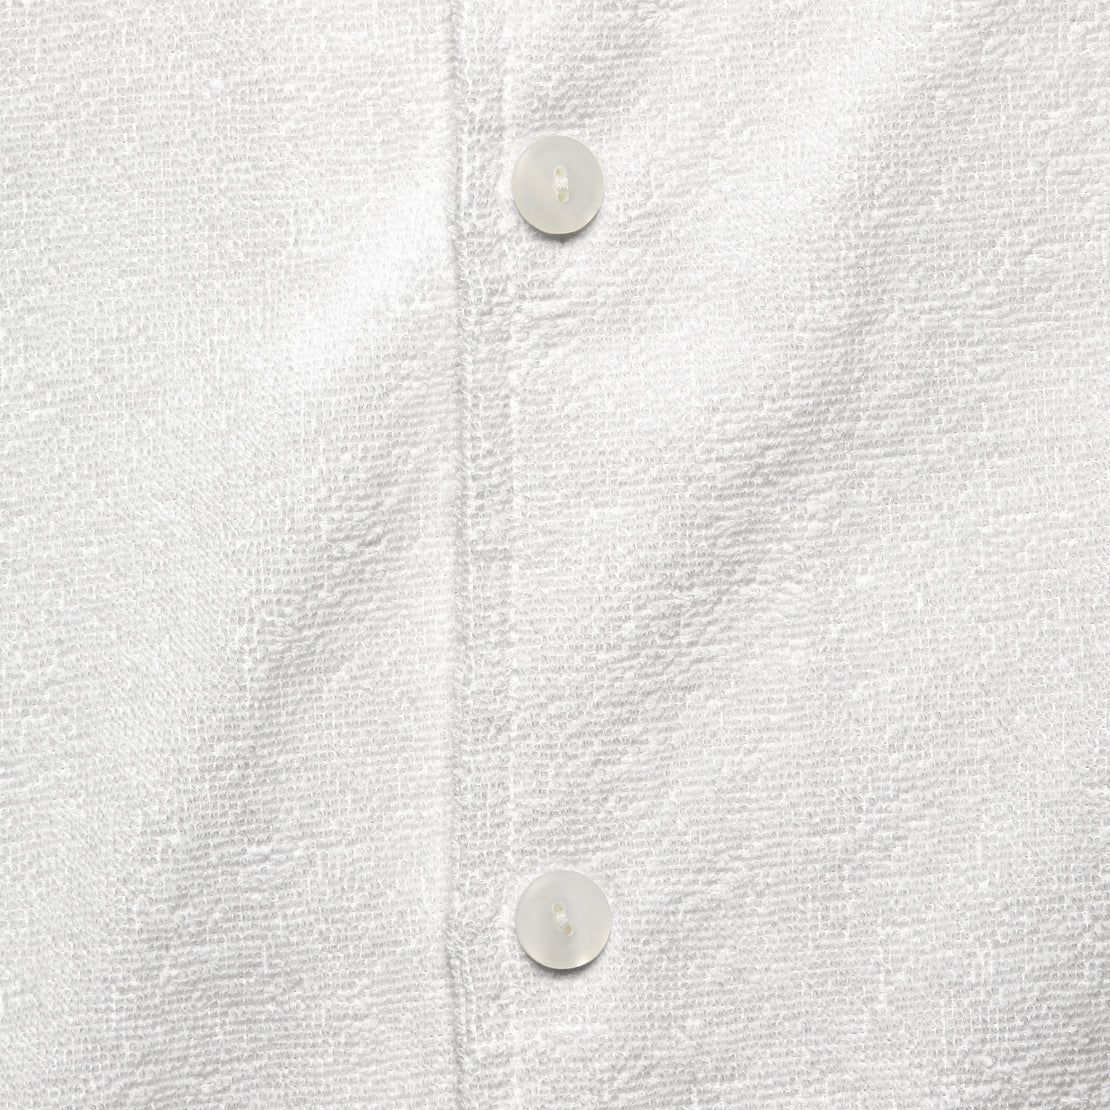 Solid Terry Shirt - White